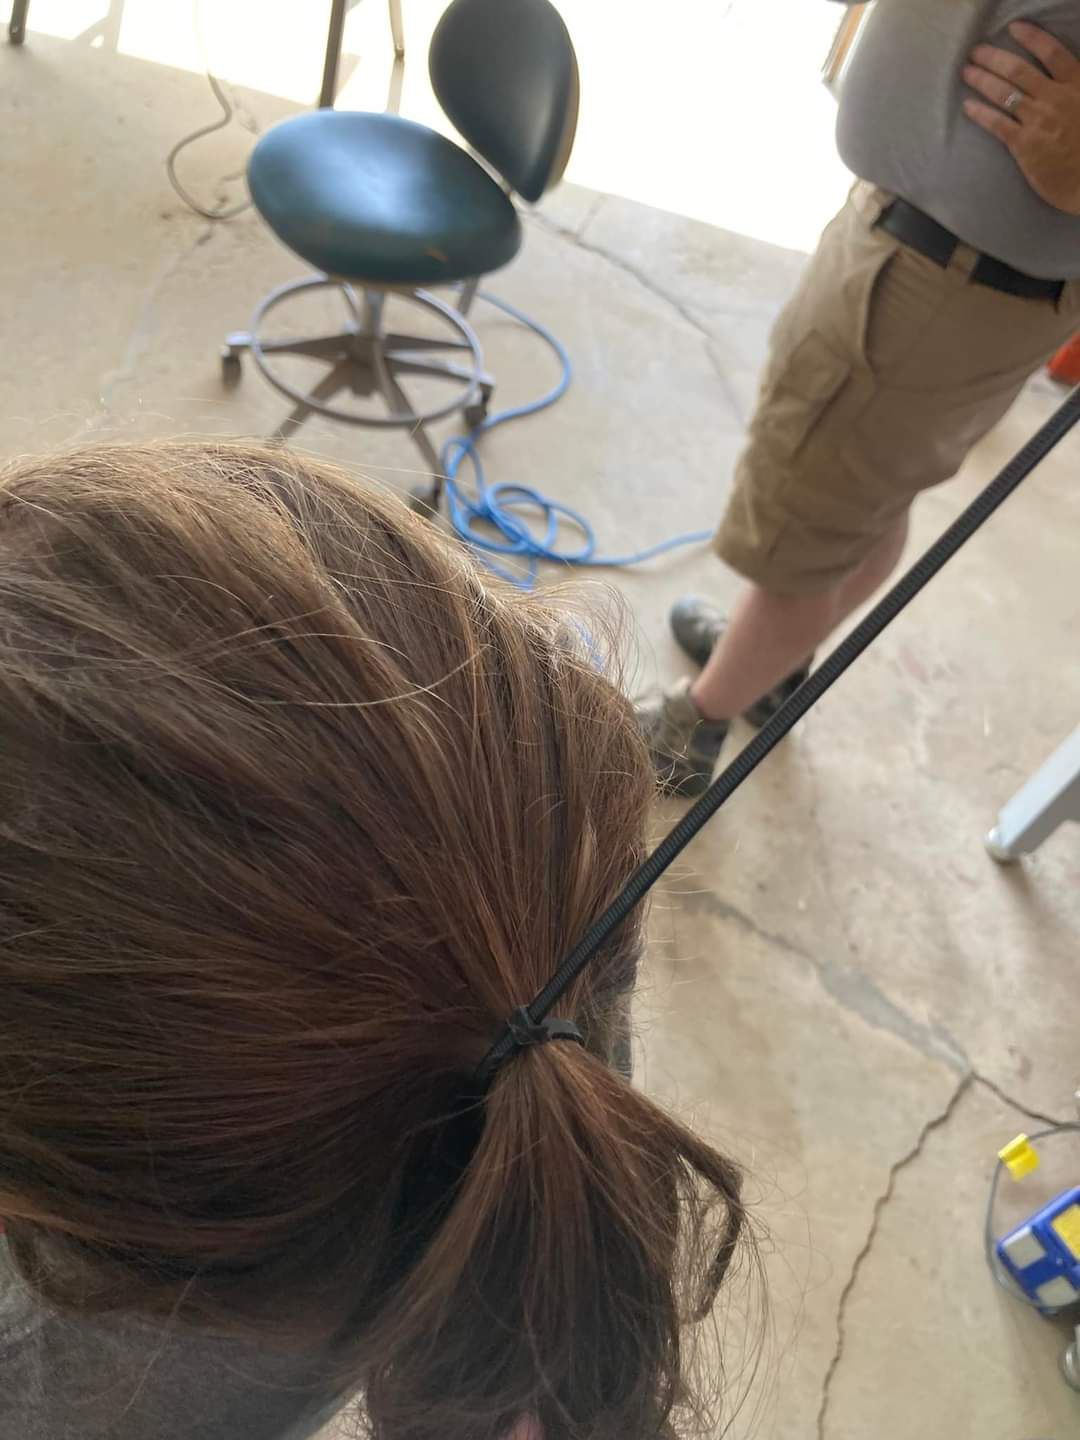 Daughter wants to work in the garage with dad. needs hair pulled back. Dad hack 101.